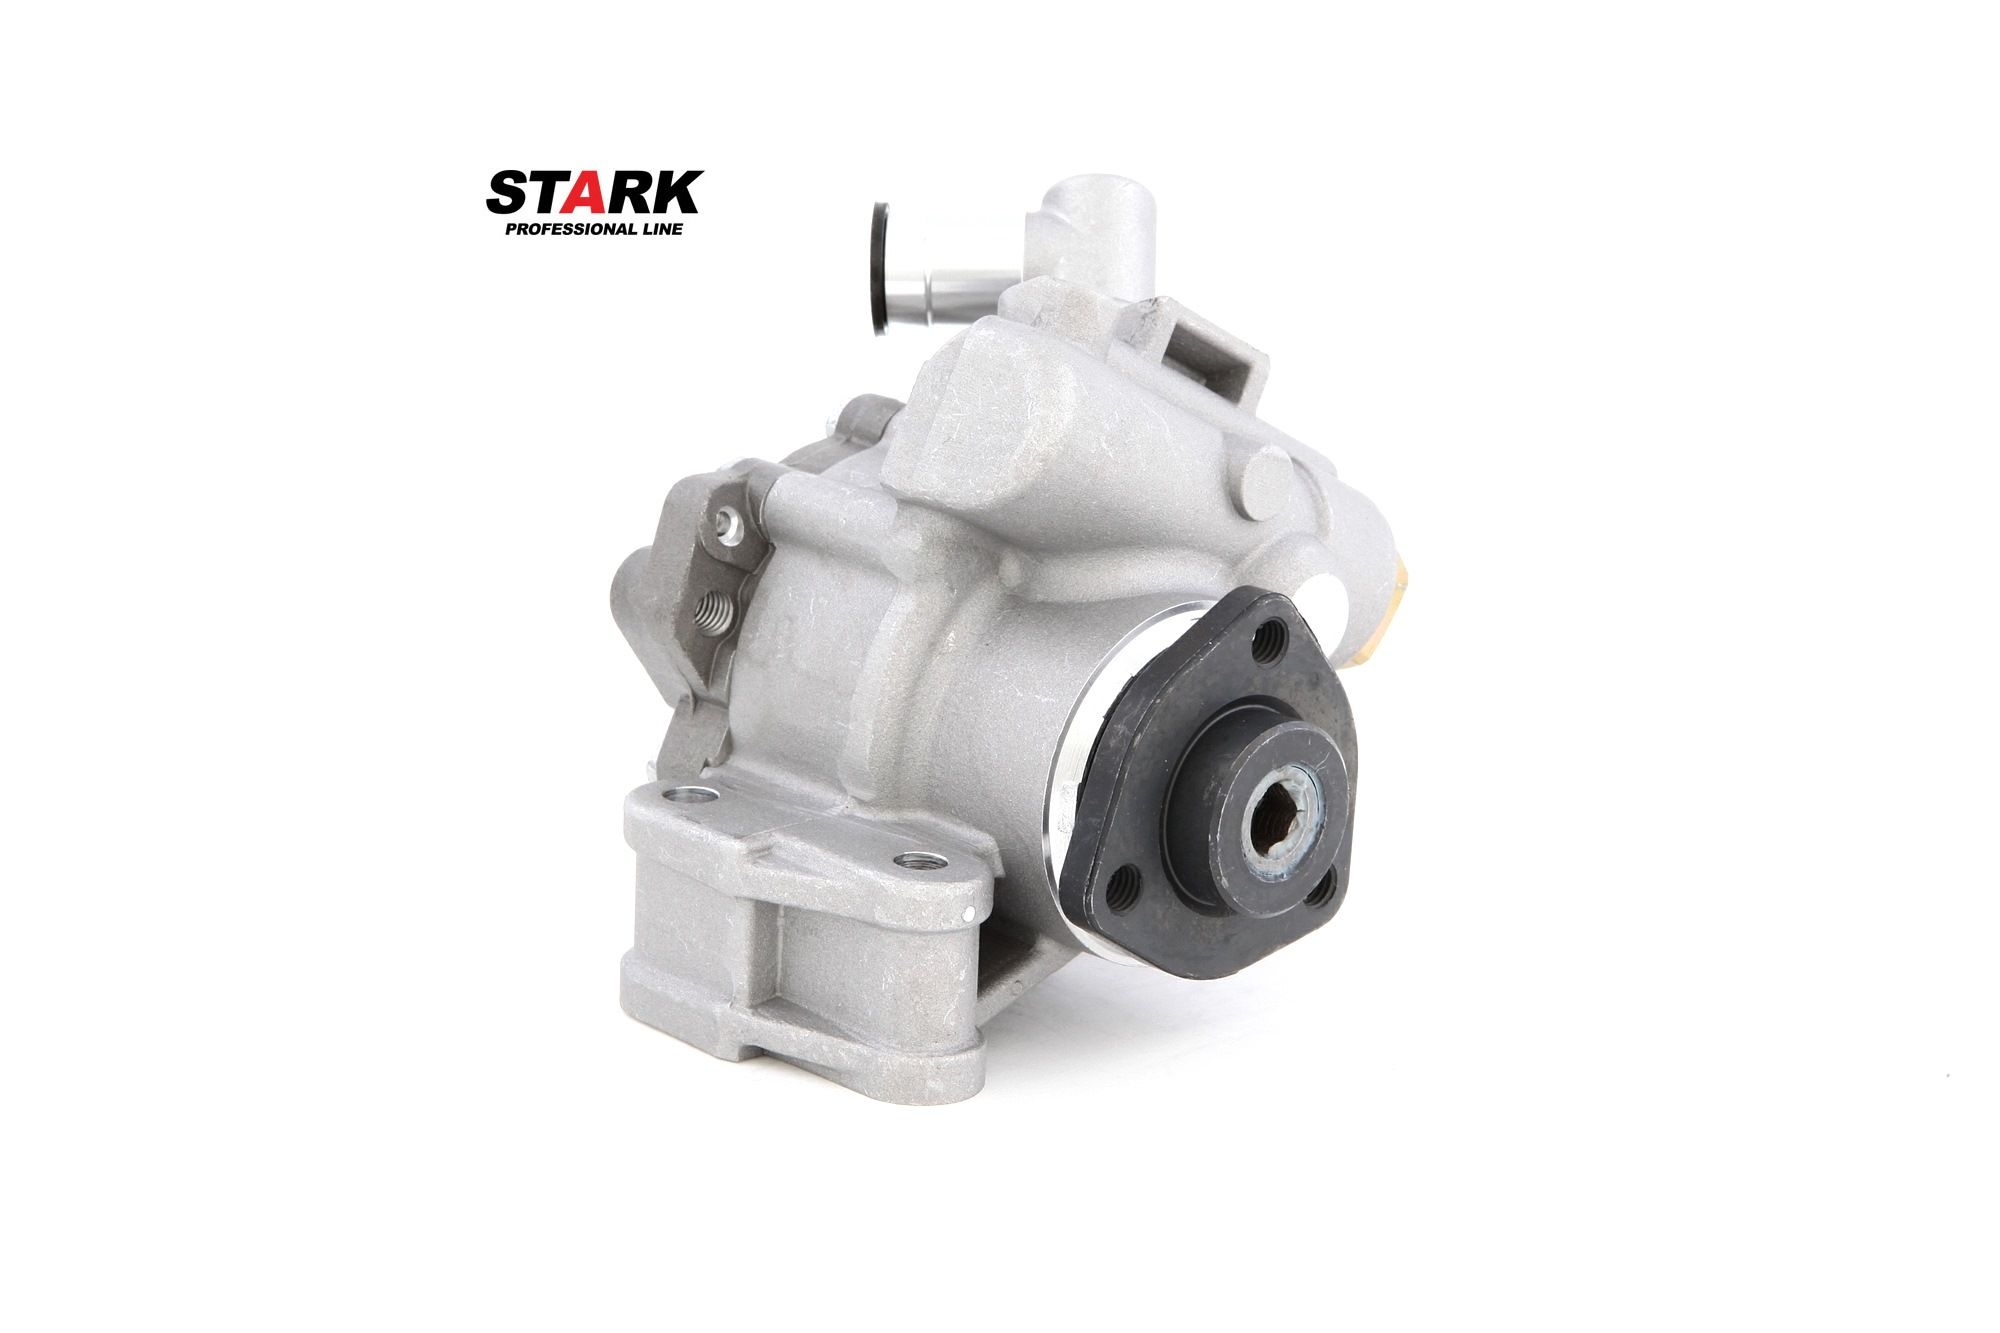 Mercedes-Benz Power steering pump STARK SKHP-0540003 at a good price